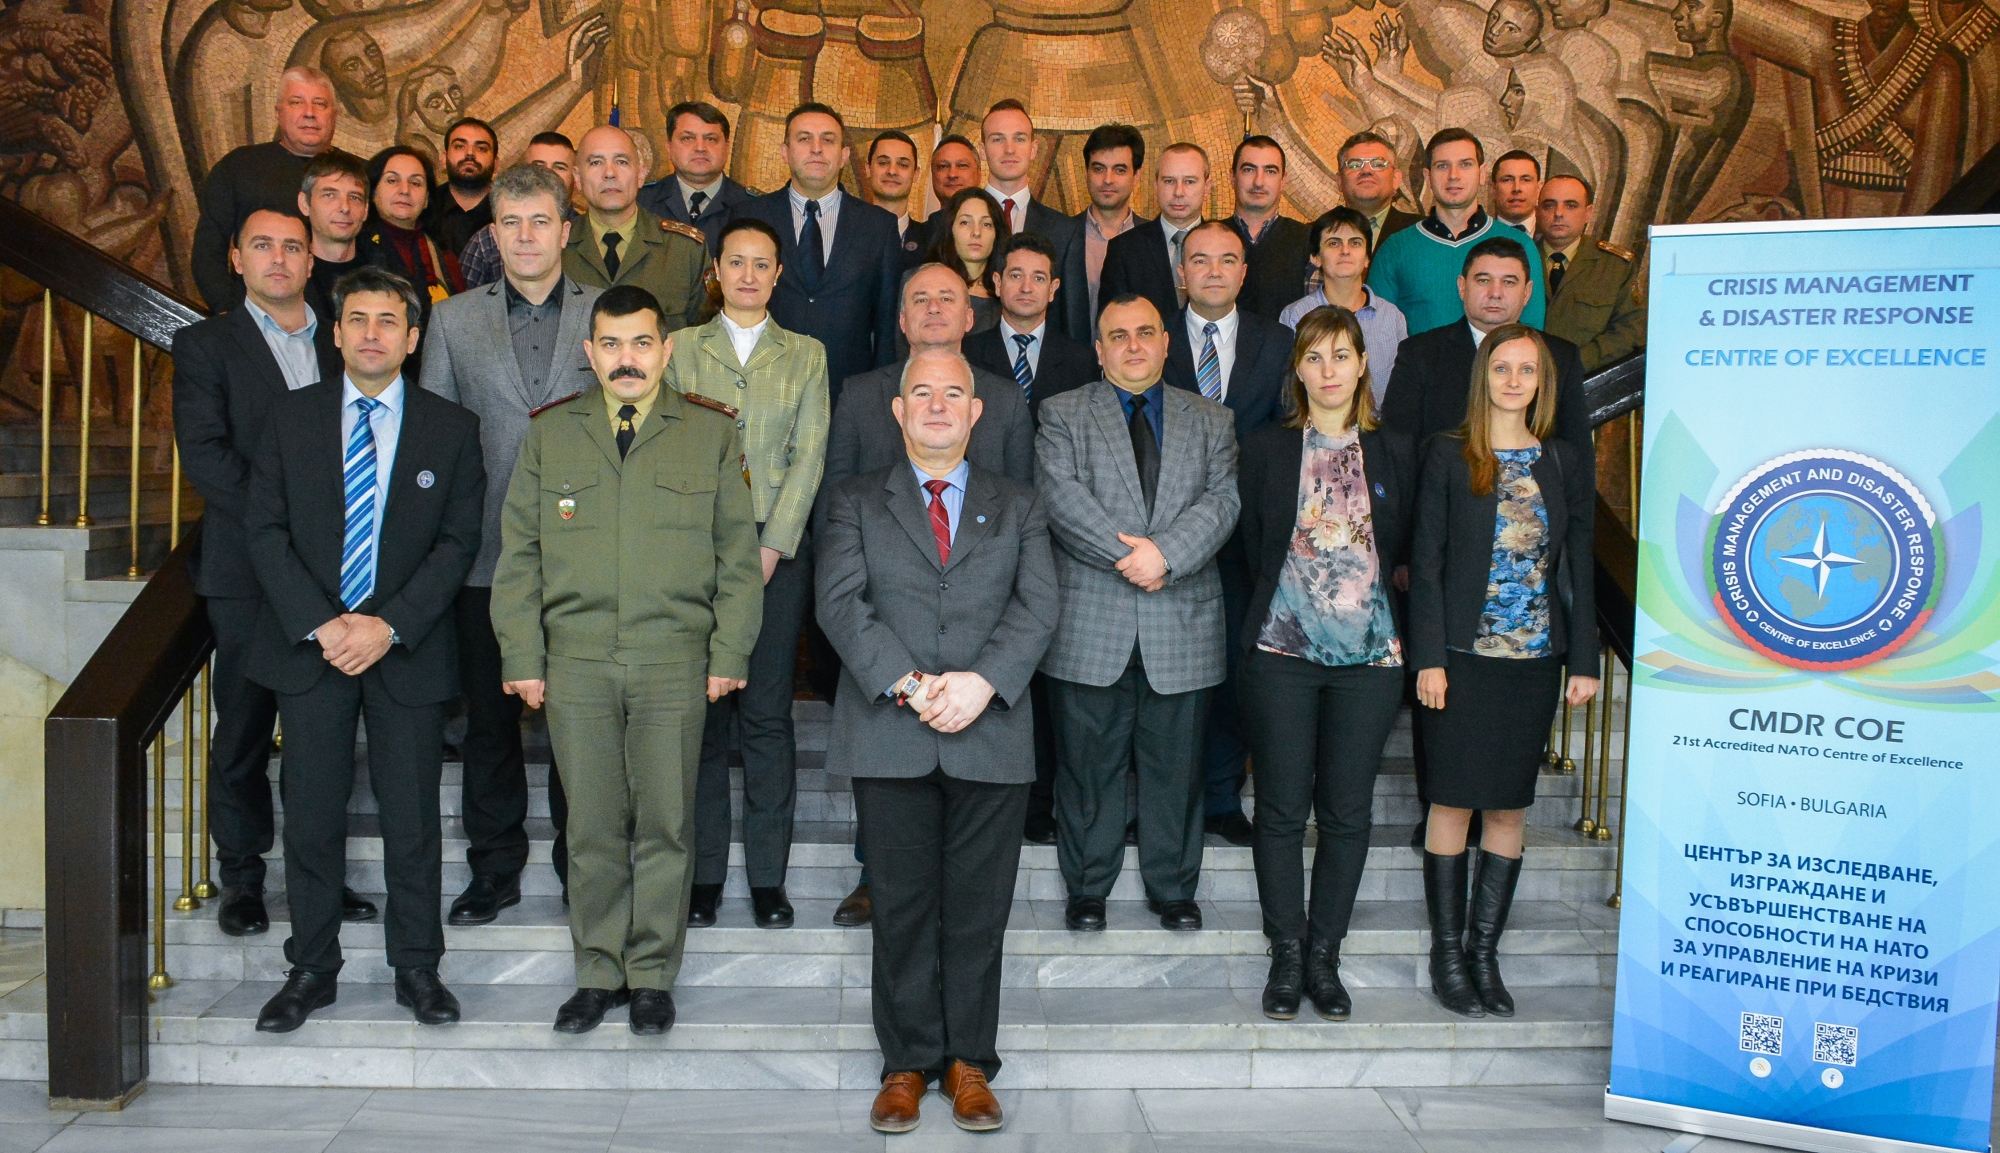 NATO Crisis Response System Course for national administration experts successfully conducted